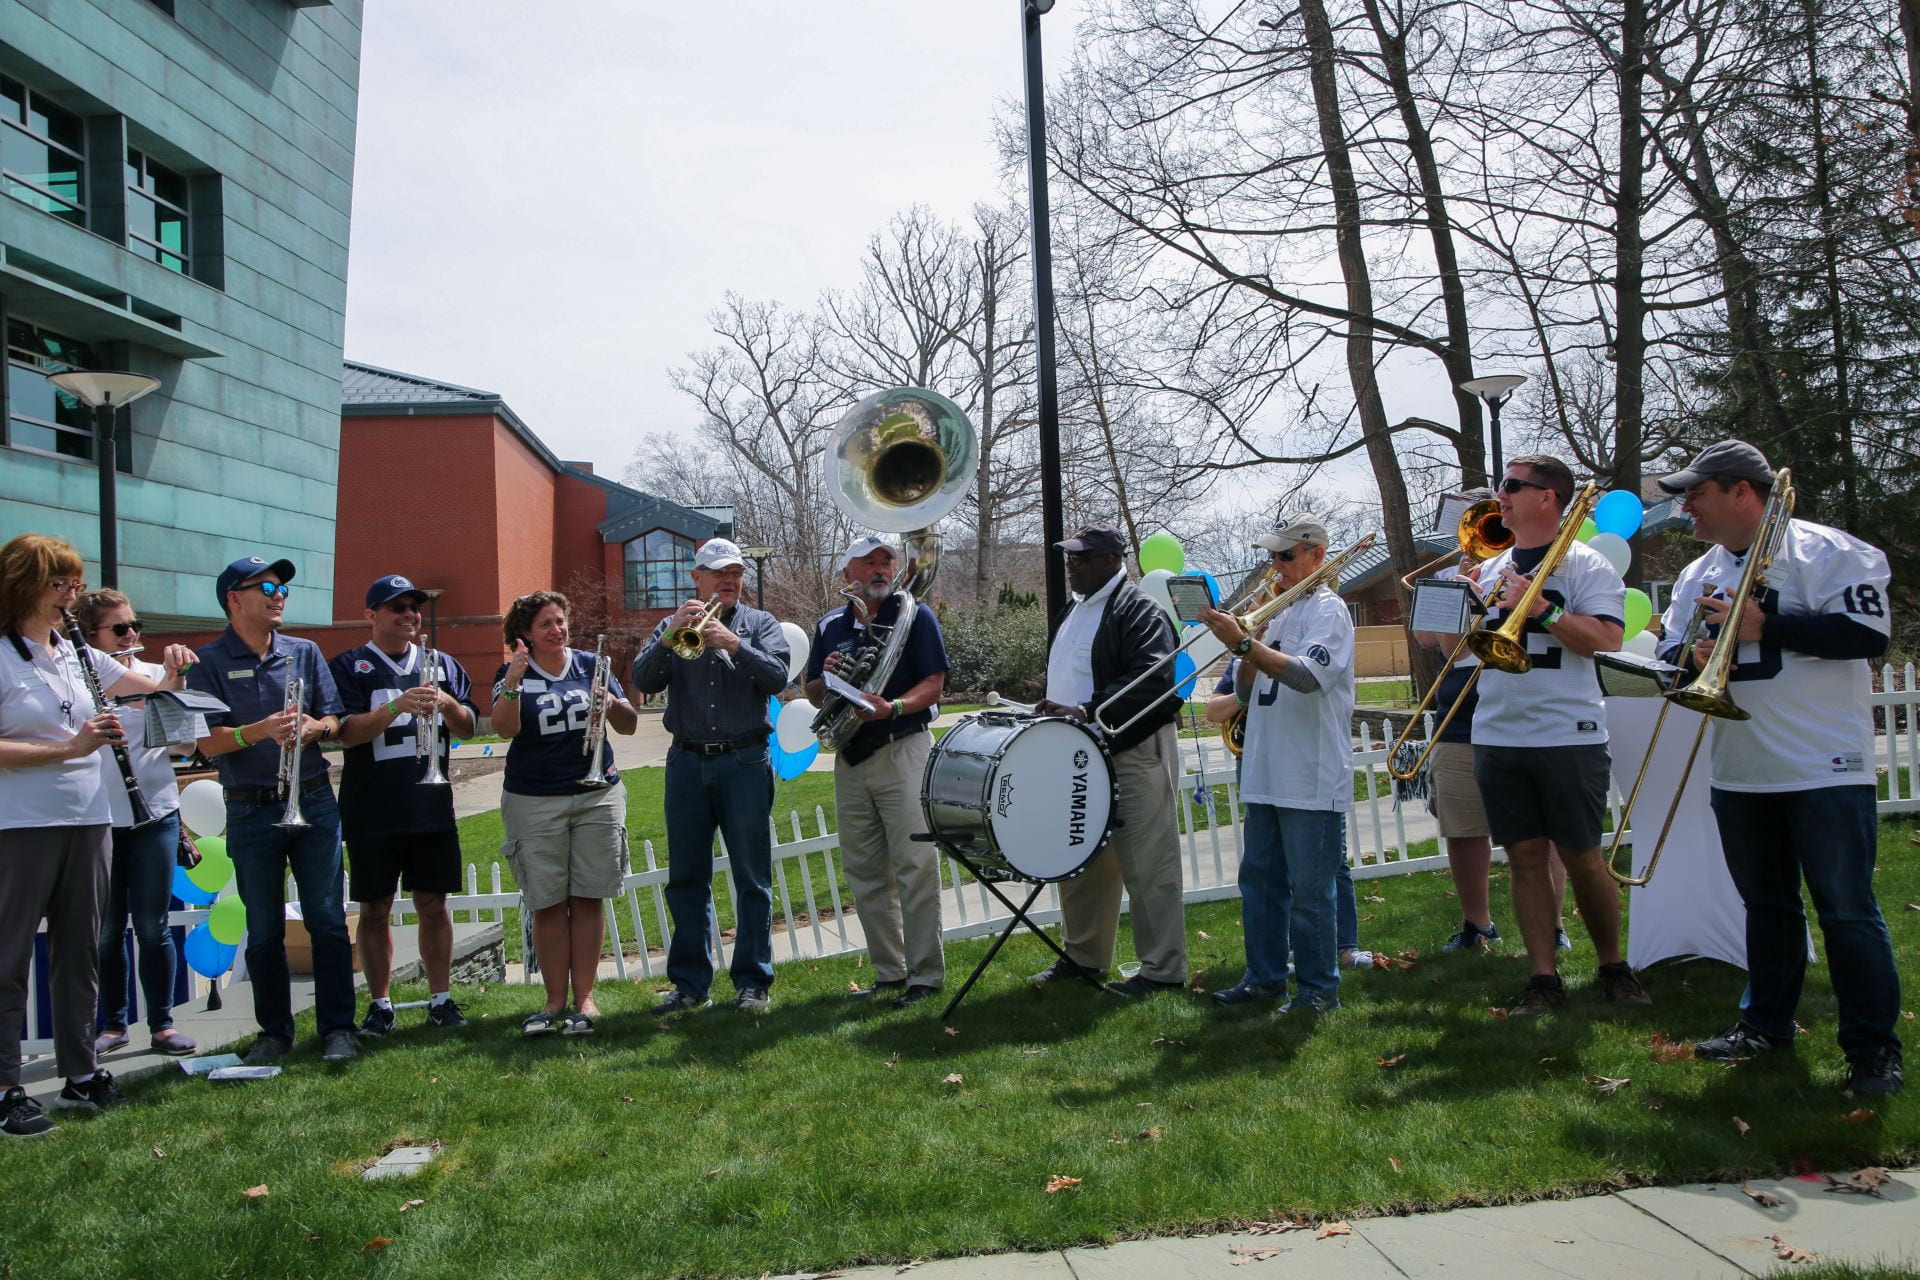 Alumni Blue Band member performing during the Blue and White Tailgate.